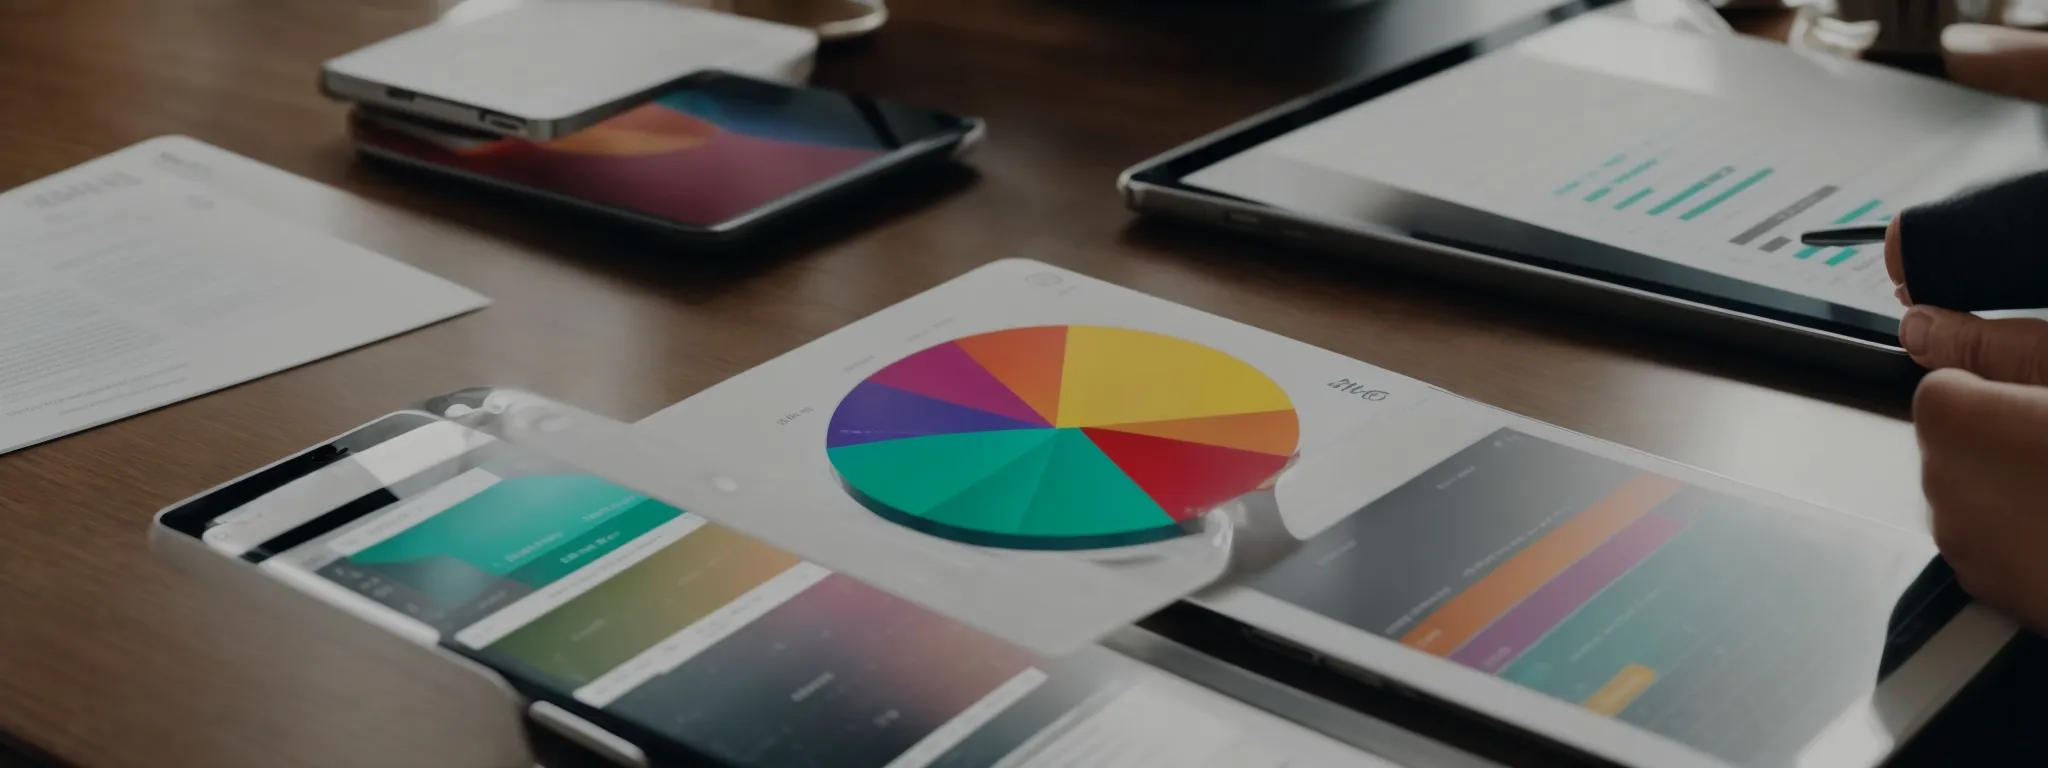 a marketer analyzes a colorful pie chart on a tablet screen to improve local seo strategies.